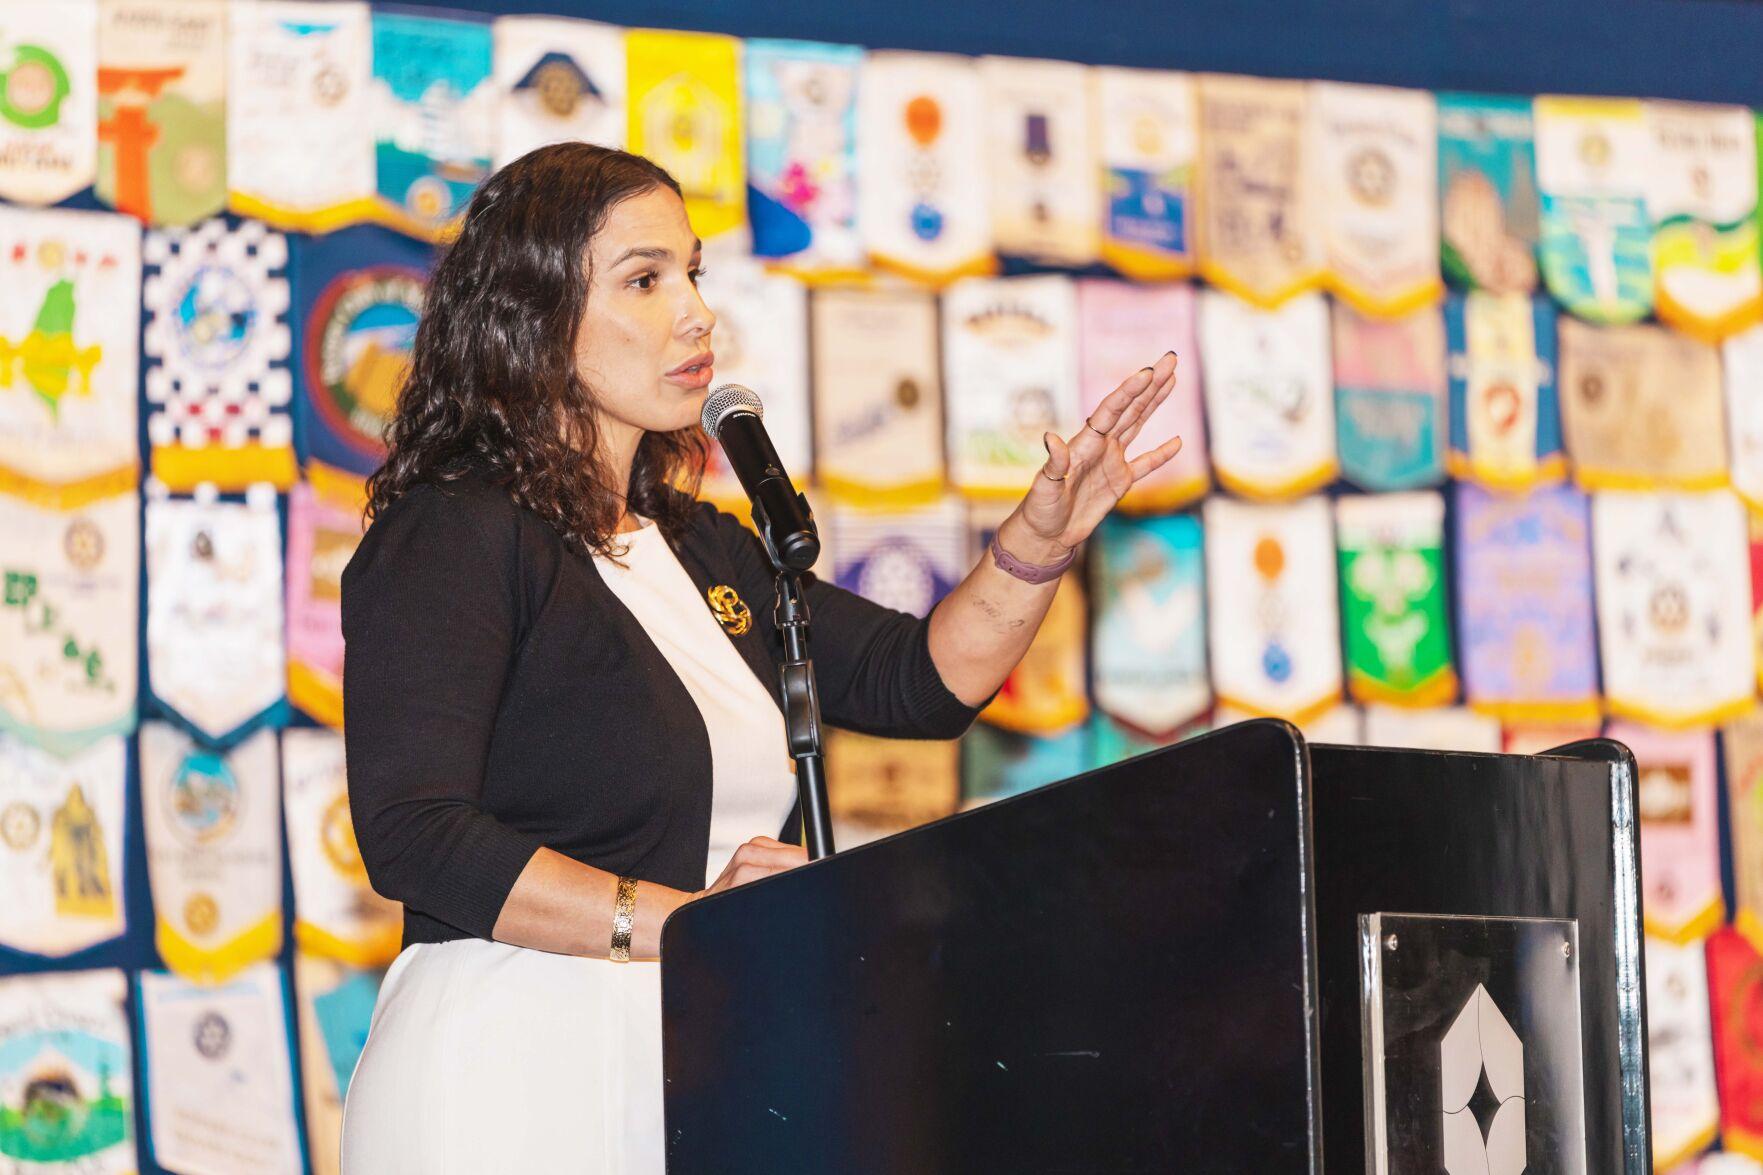 NMC Community Development Institute Director Maria Valentina Haberman on Tuesday addressed members of the Saipan Rotary Club about the apprenticeship program